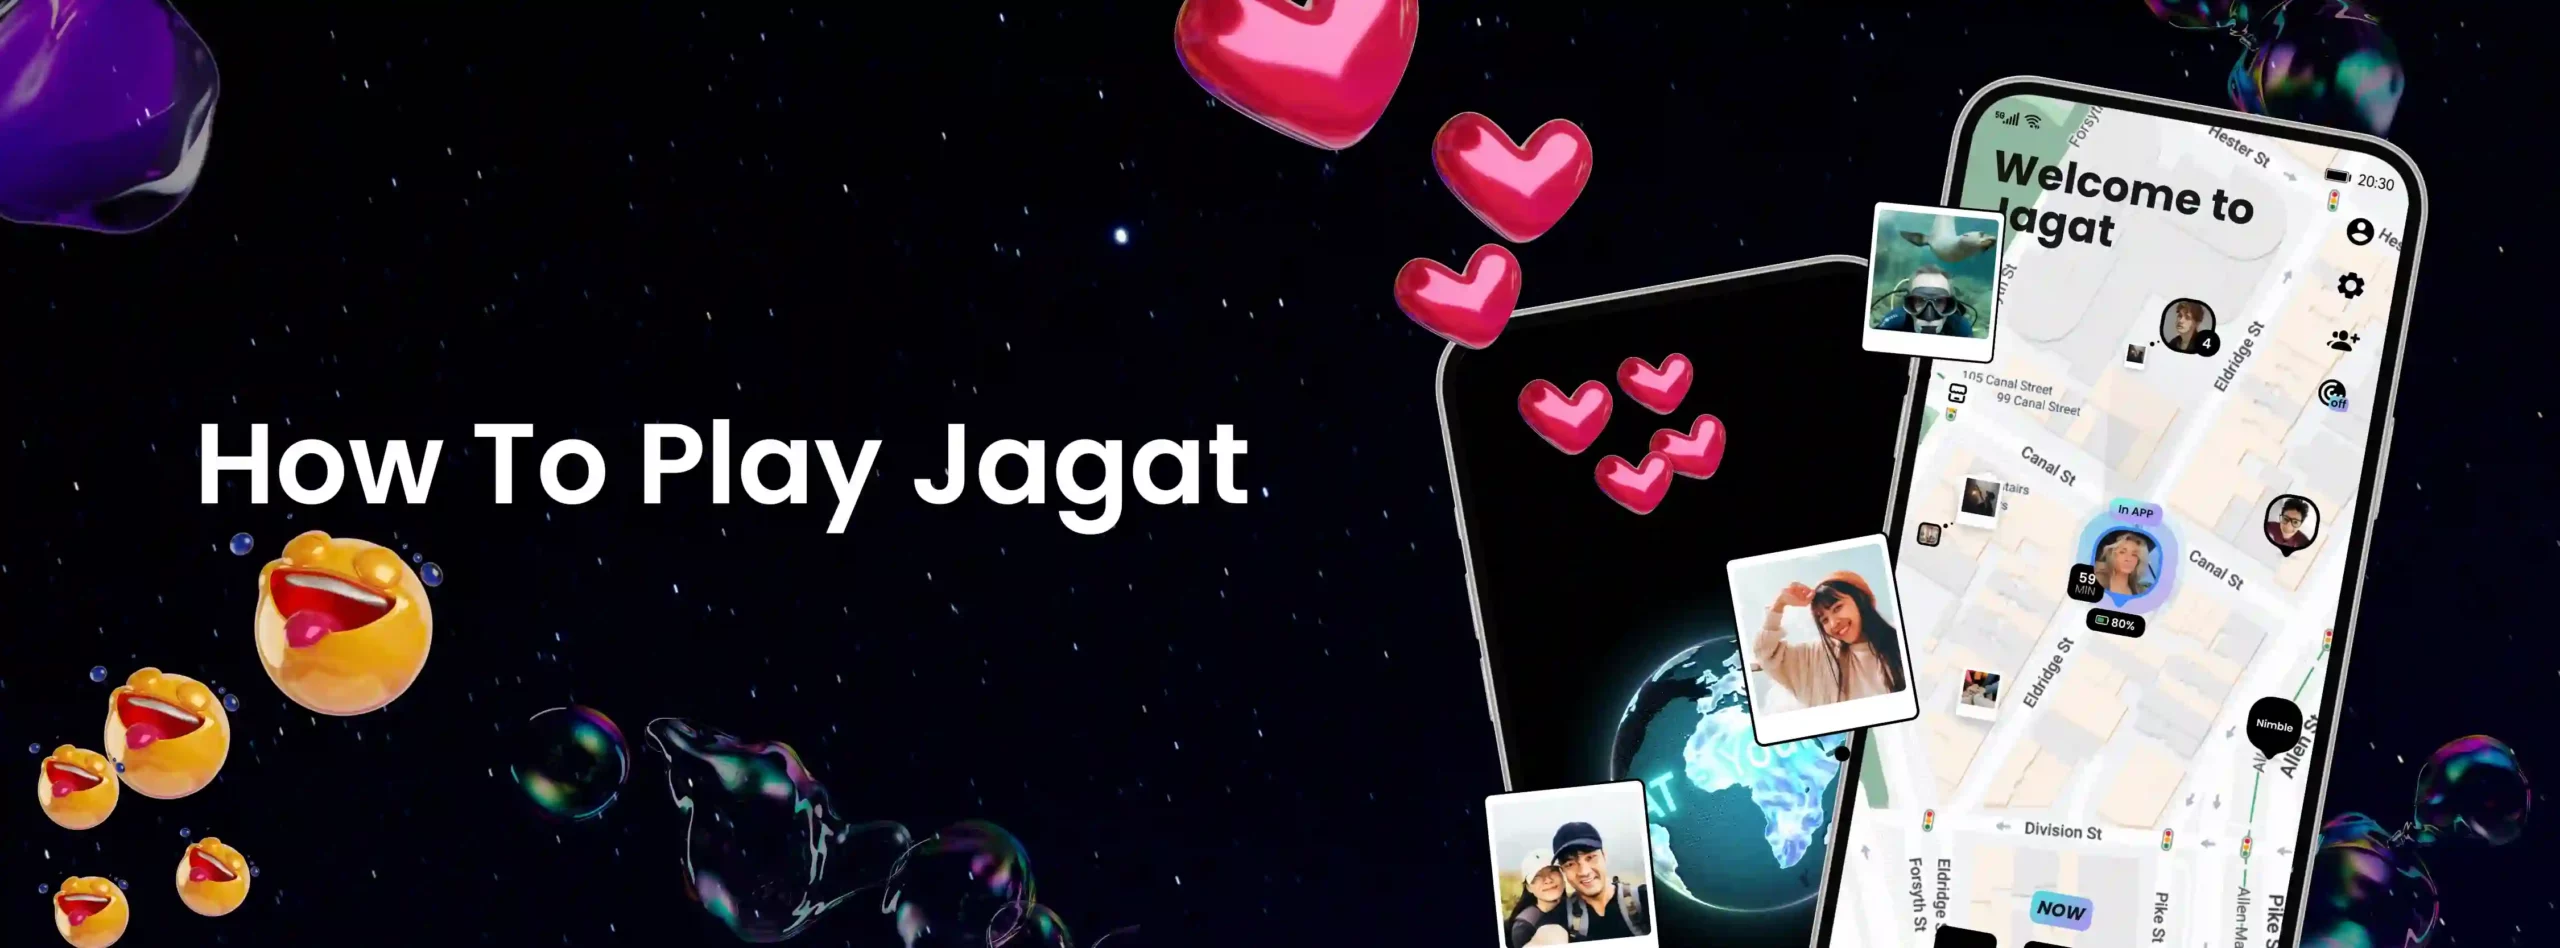 how to play Jagat